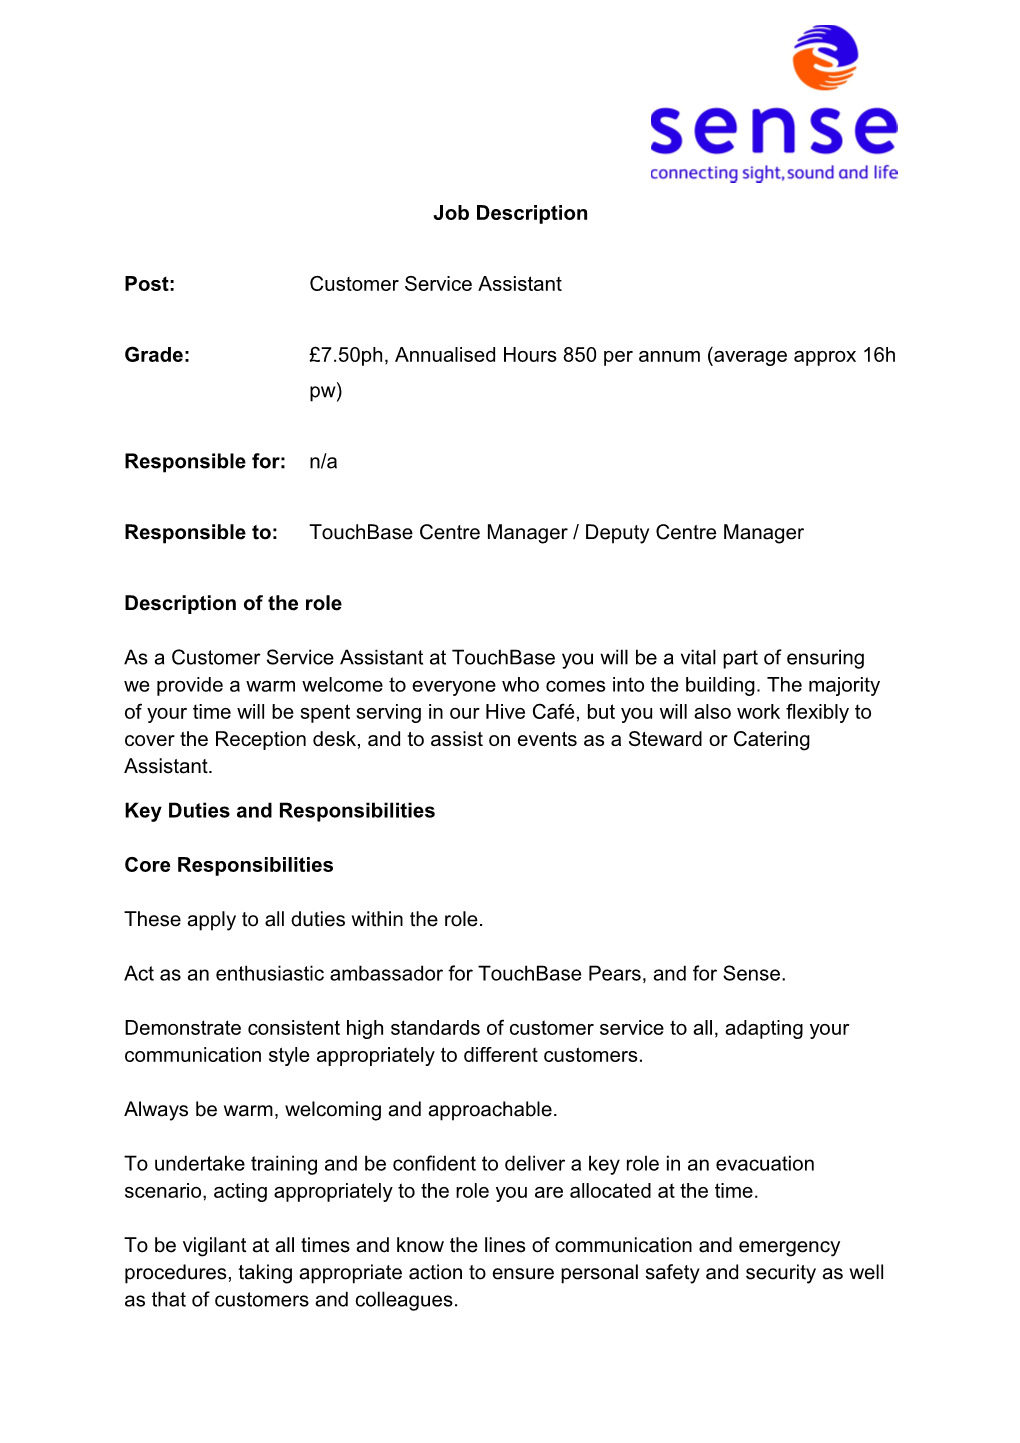 Post:Customer Service Assistant